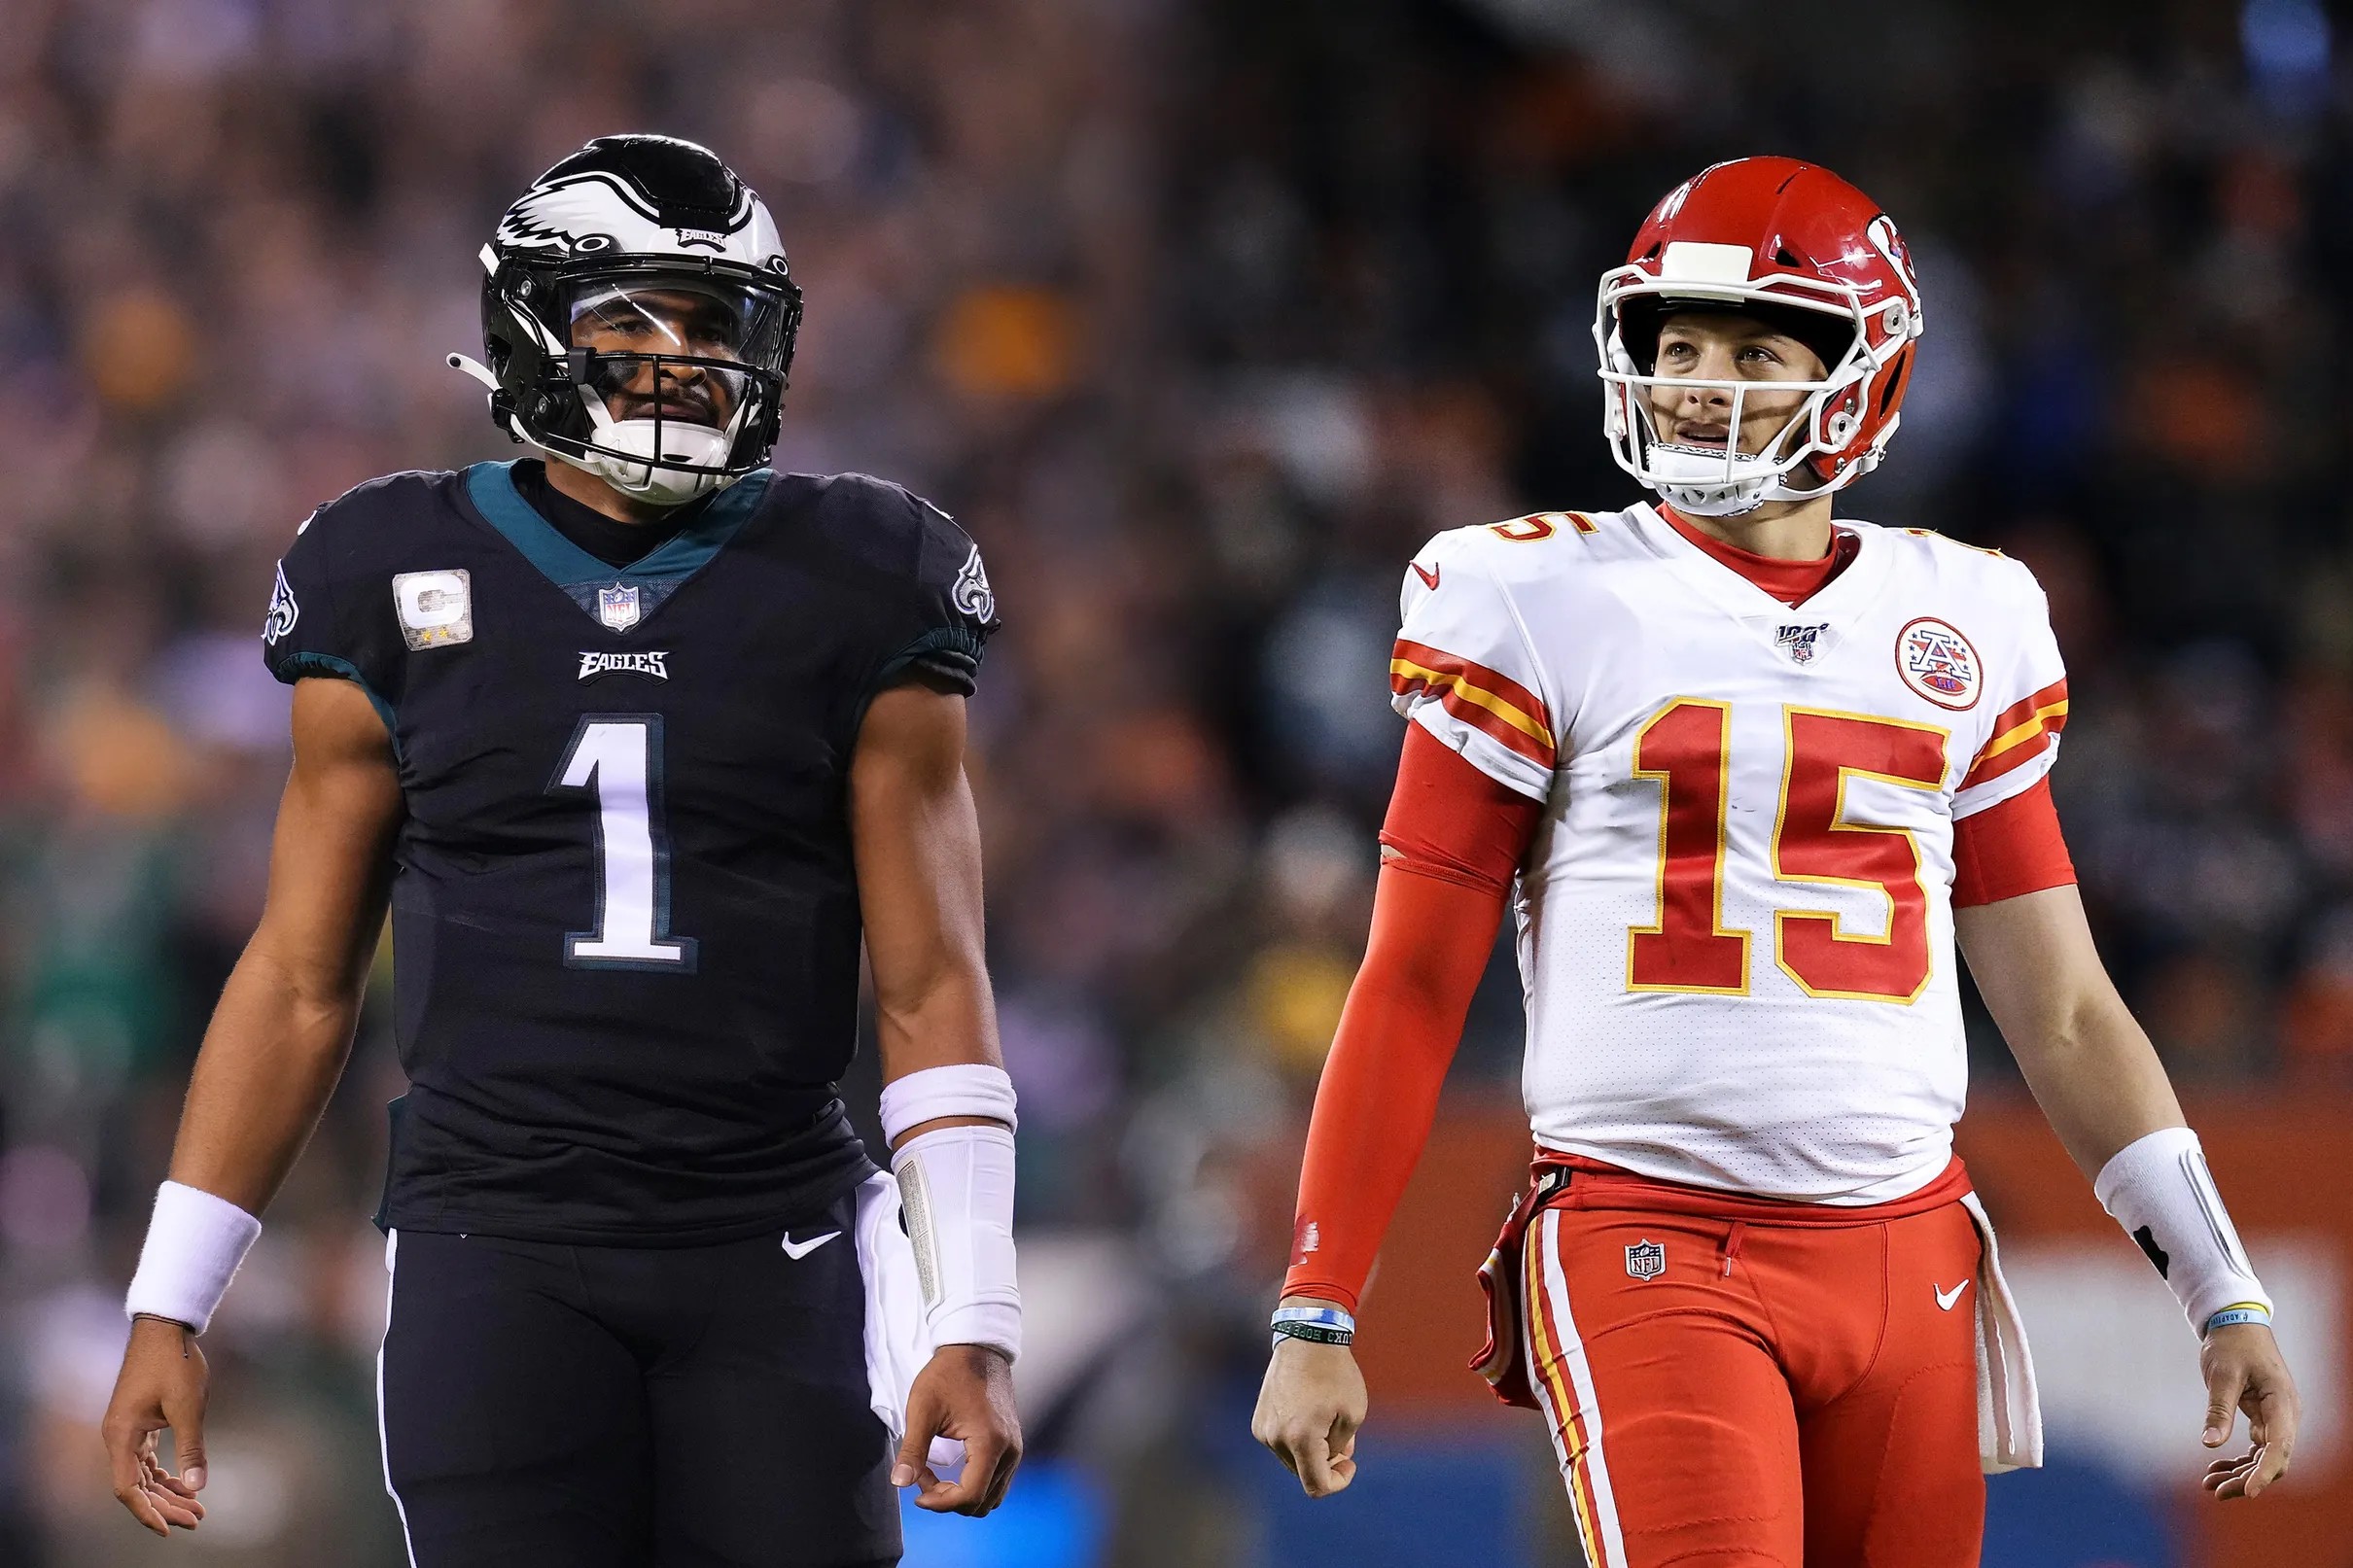 Chiefs vs. Eagles Super Bowl thread: Mahomes wins another ring